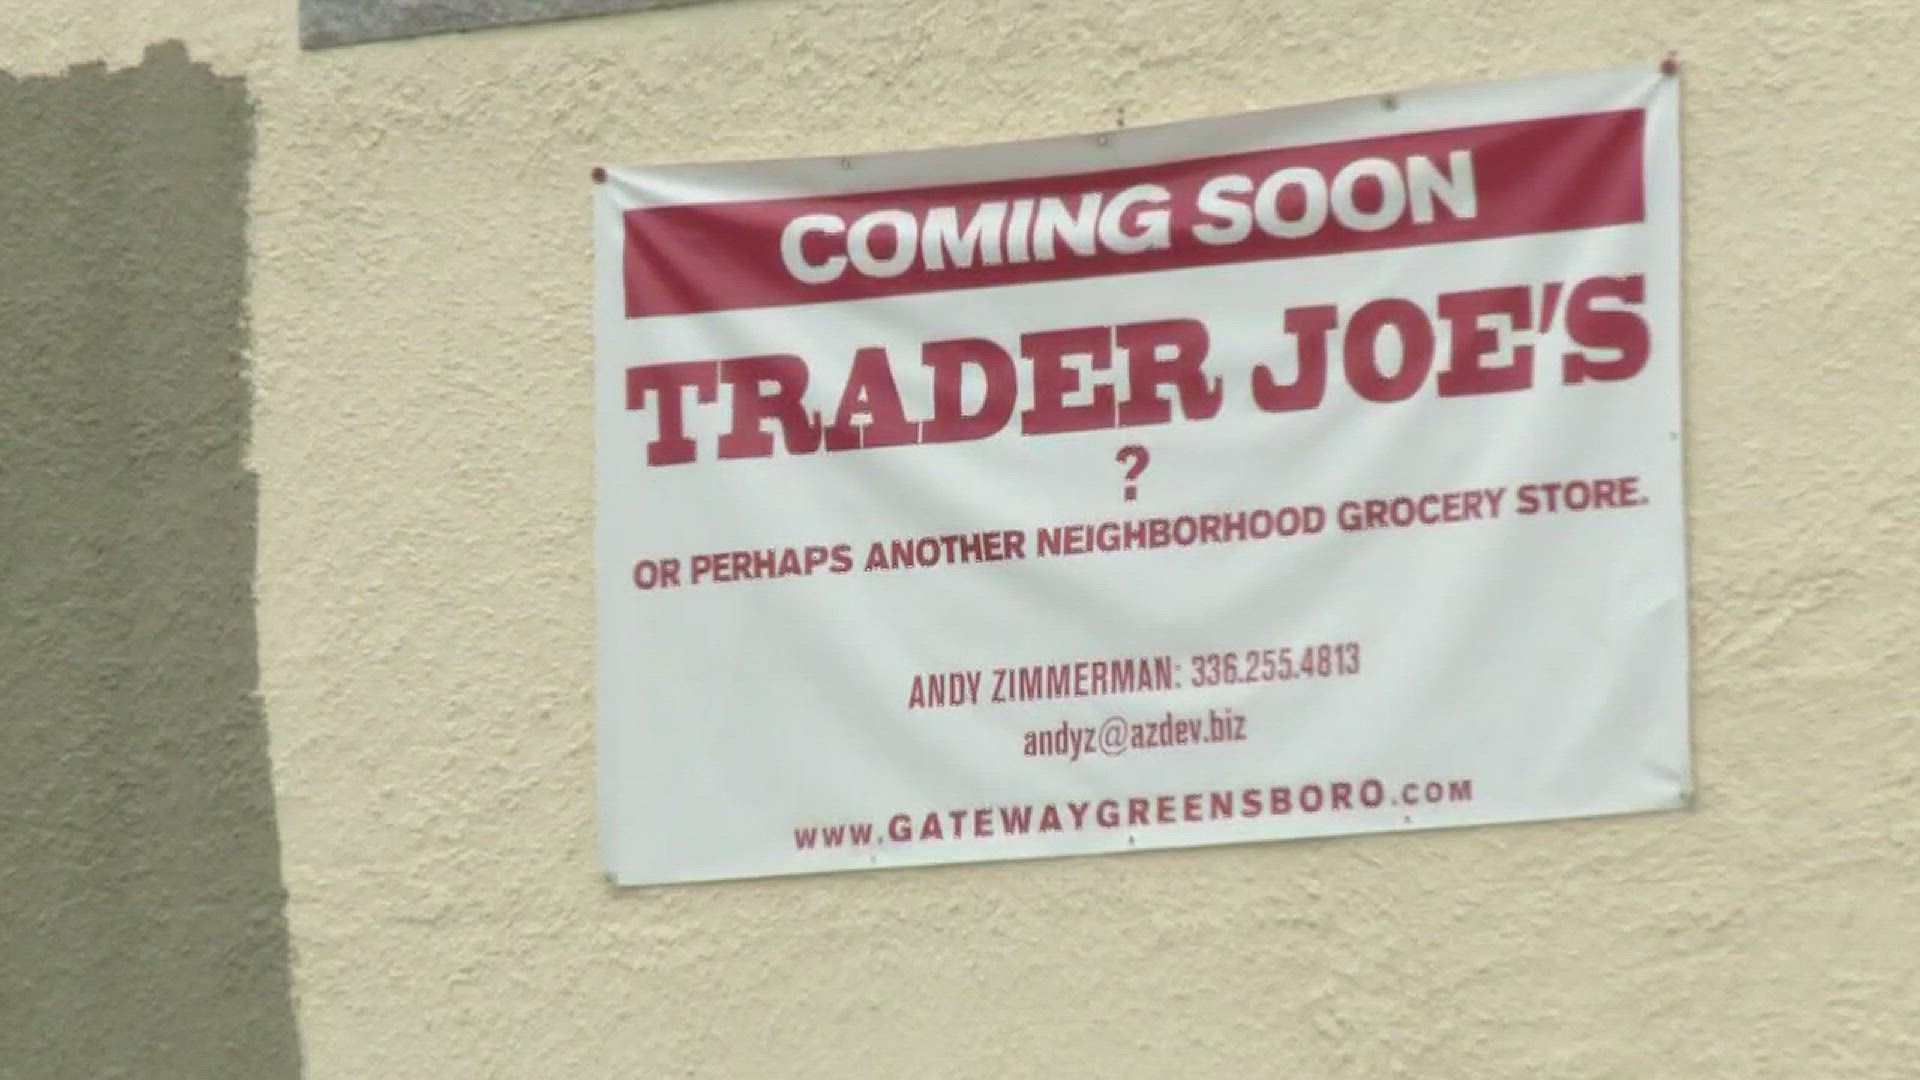 "Coming Soon Trader Joe's ?" Sign Posted In Greensboro